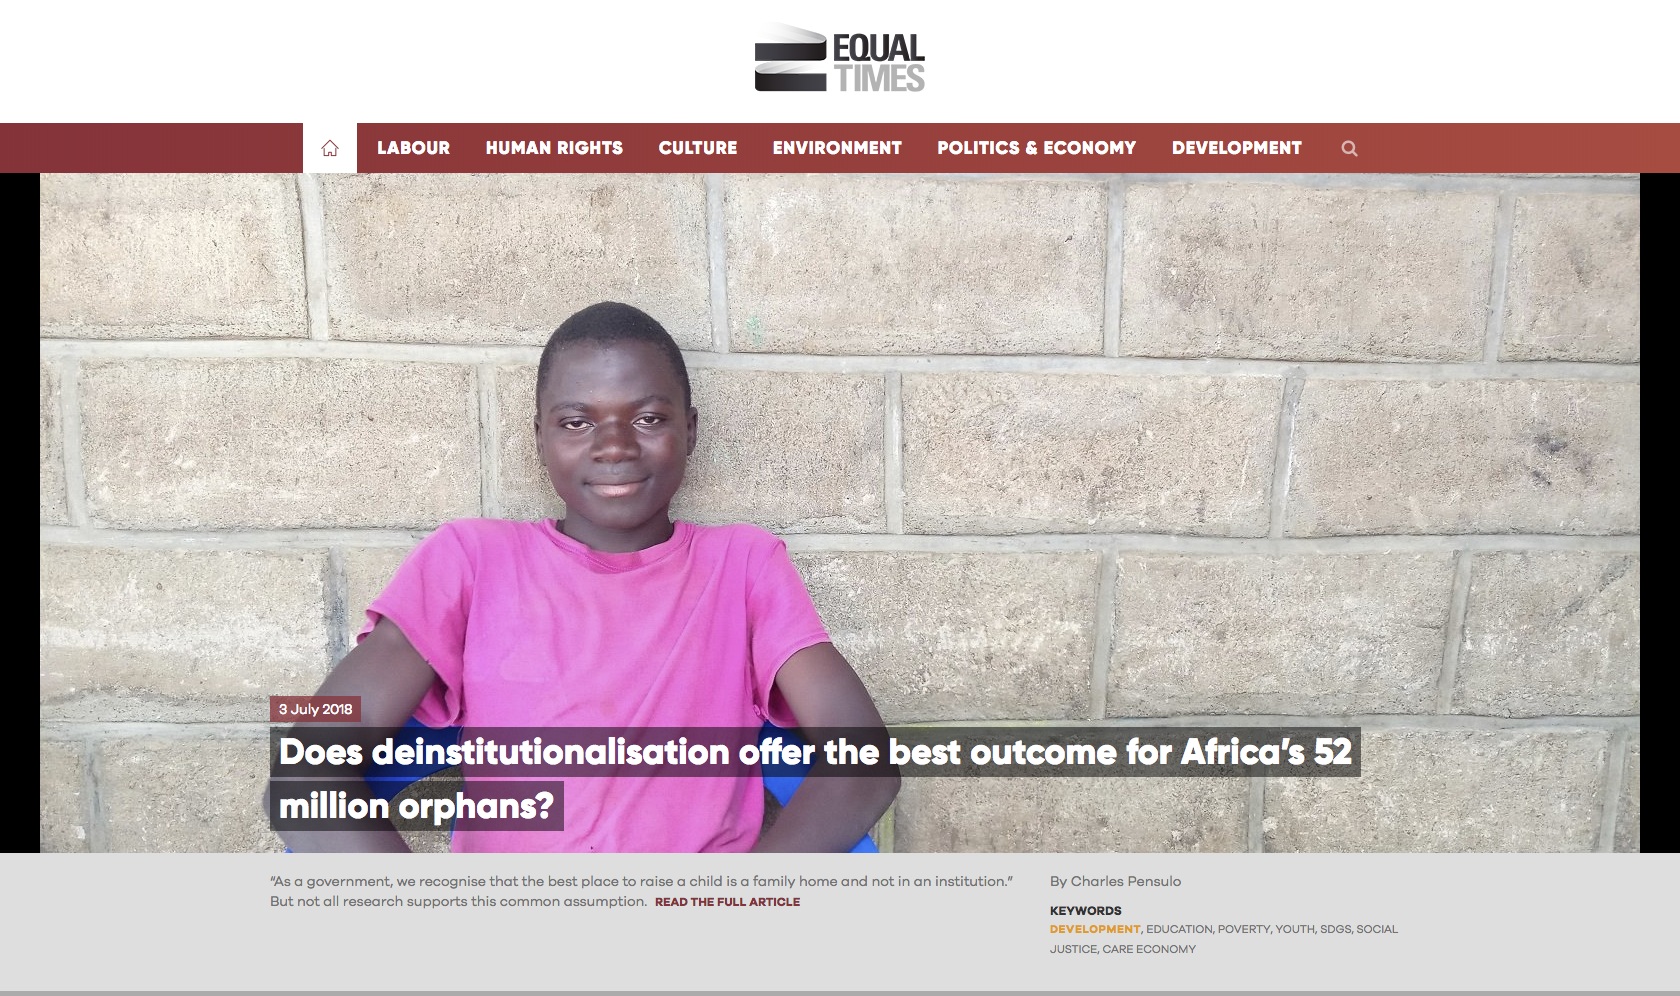 Article on Deinstitutionalization in Malawi from The Equal Times